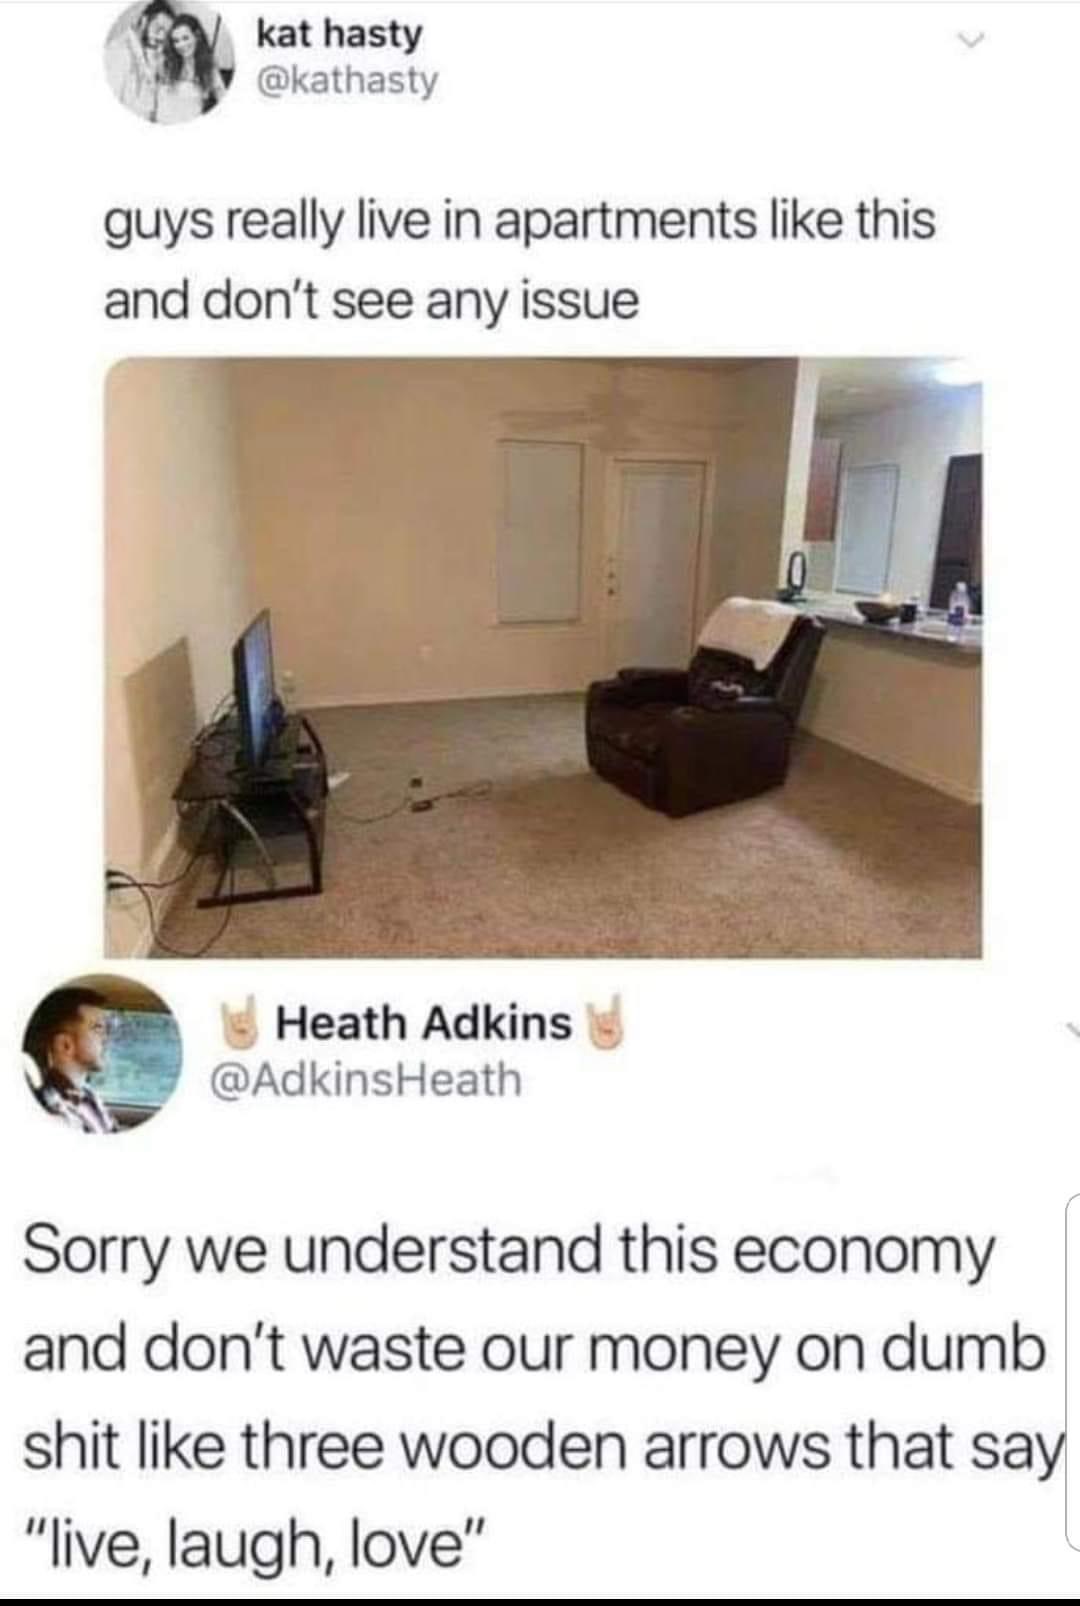 guys really live in apartments like - kat hasty guys really live in apartments this and don't see any issue Heath Adkins Sorry we understand this economy and don't waste our money on dumb shit three wooden arrows that say "live, laugh, love"